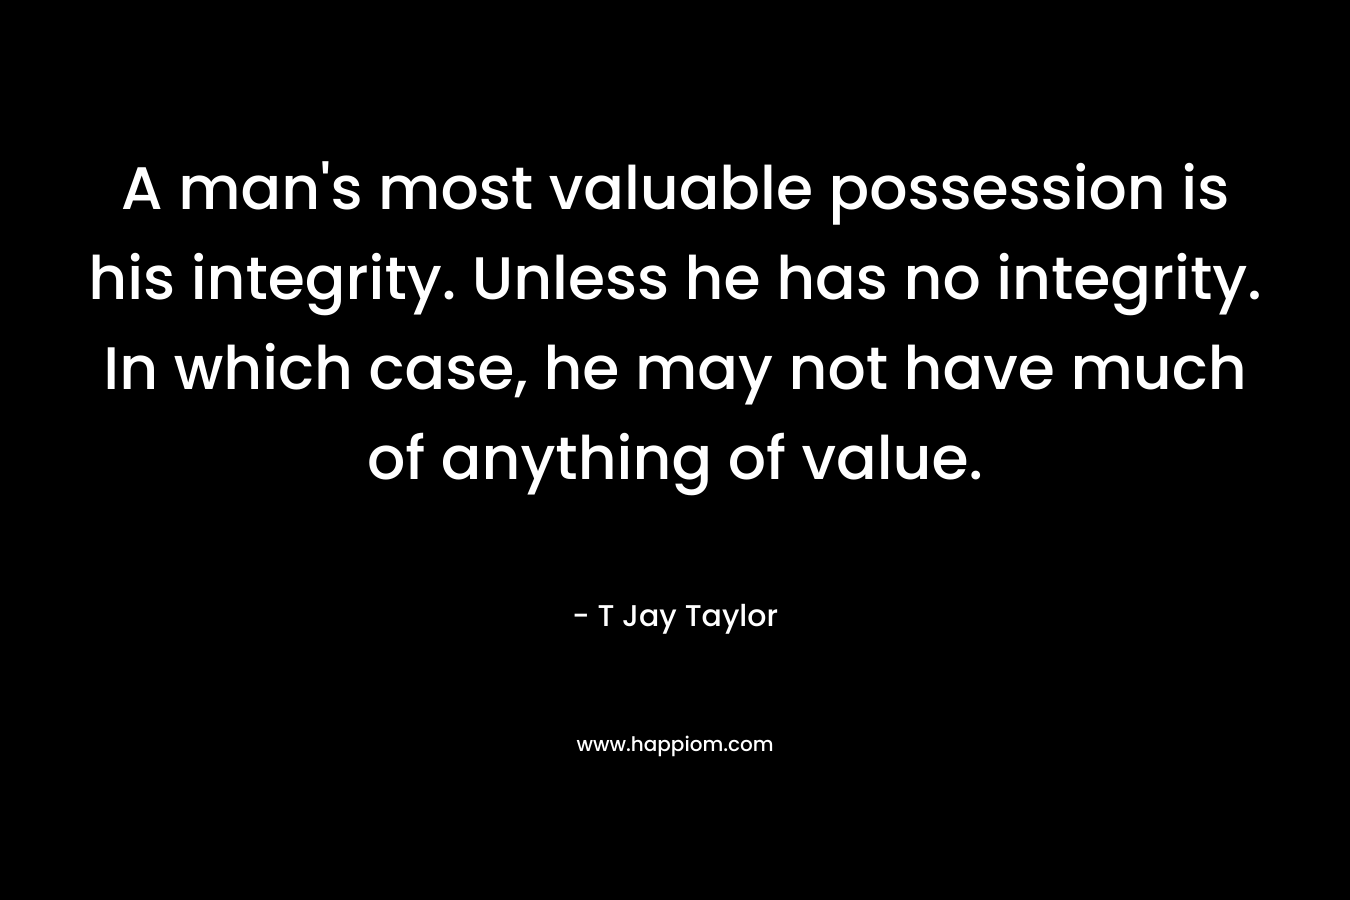 A man's most valuable possession is his integrity. Unless he has no integrity. In which case, he may not have much of anything of value.